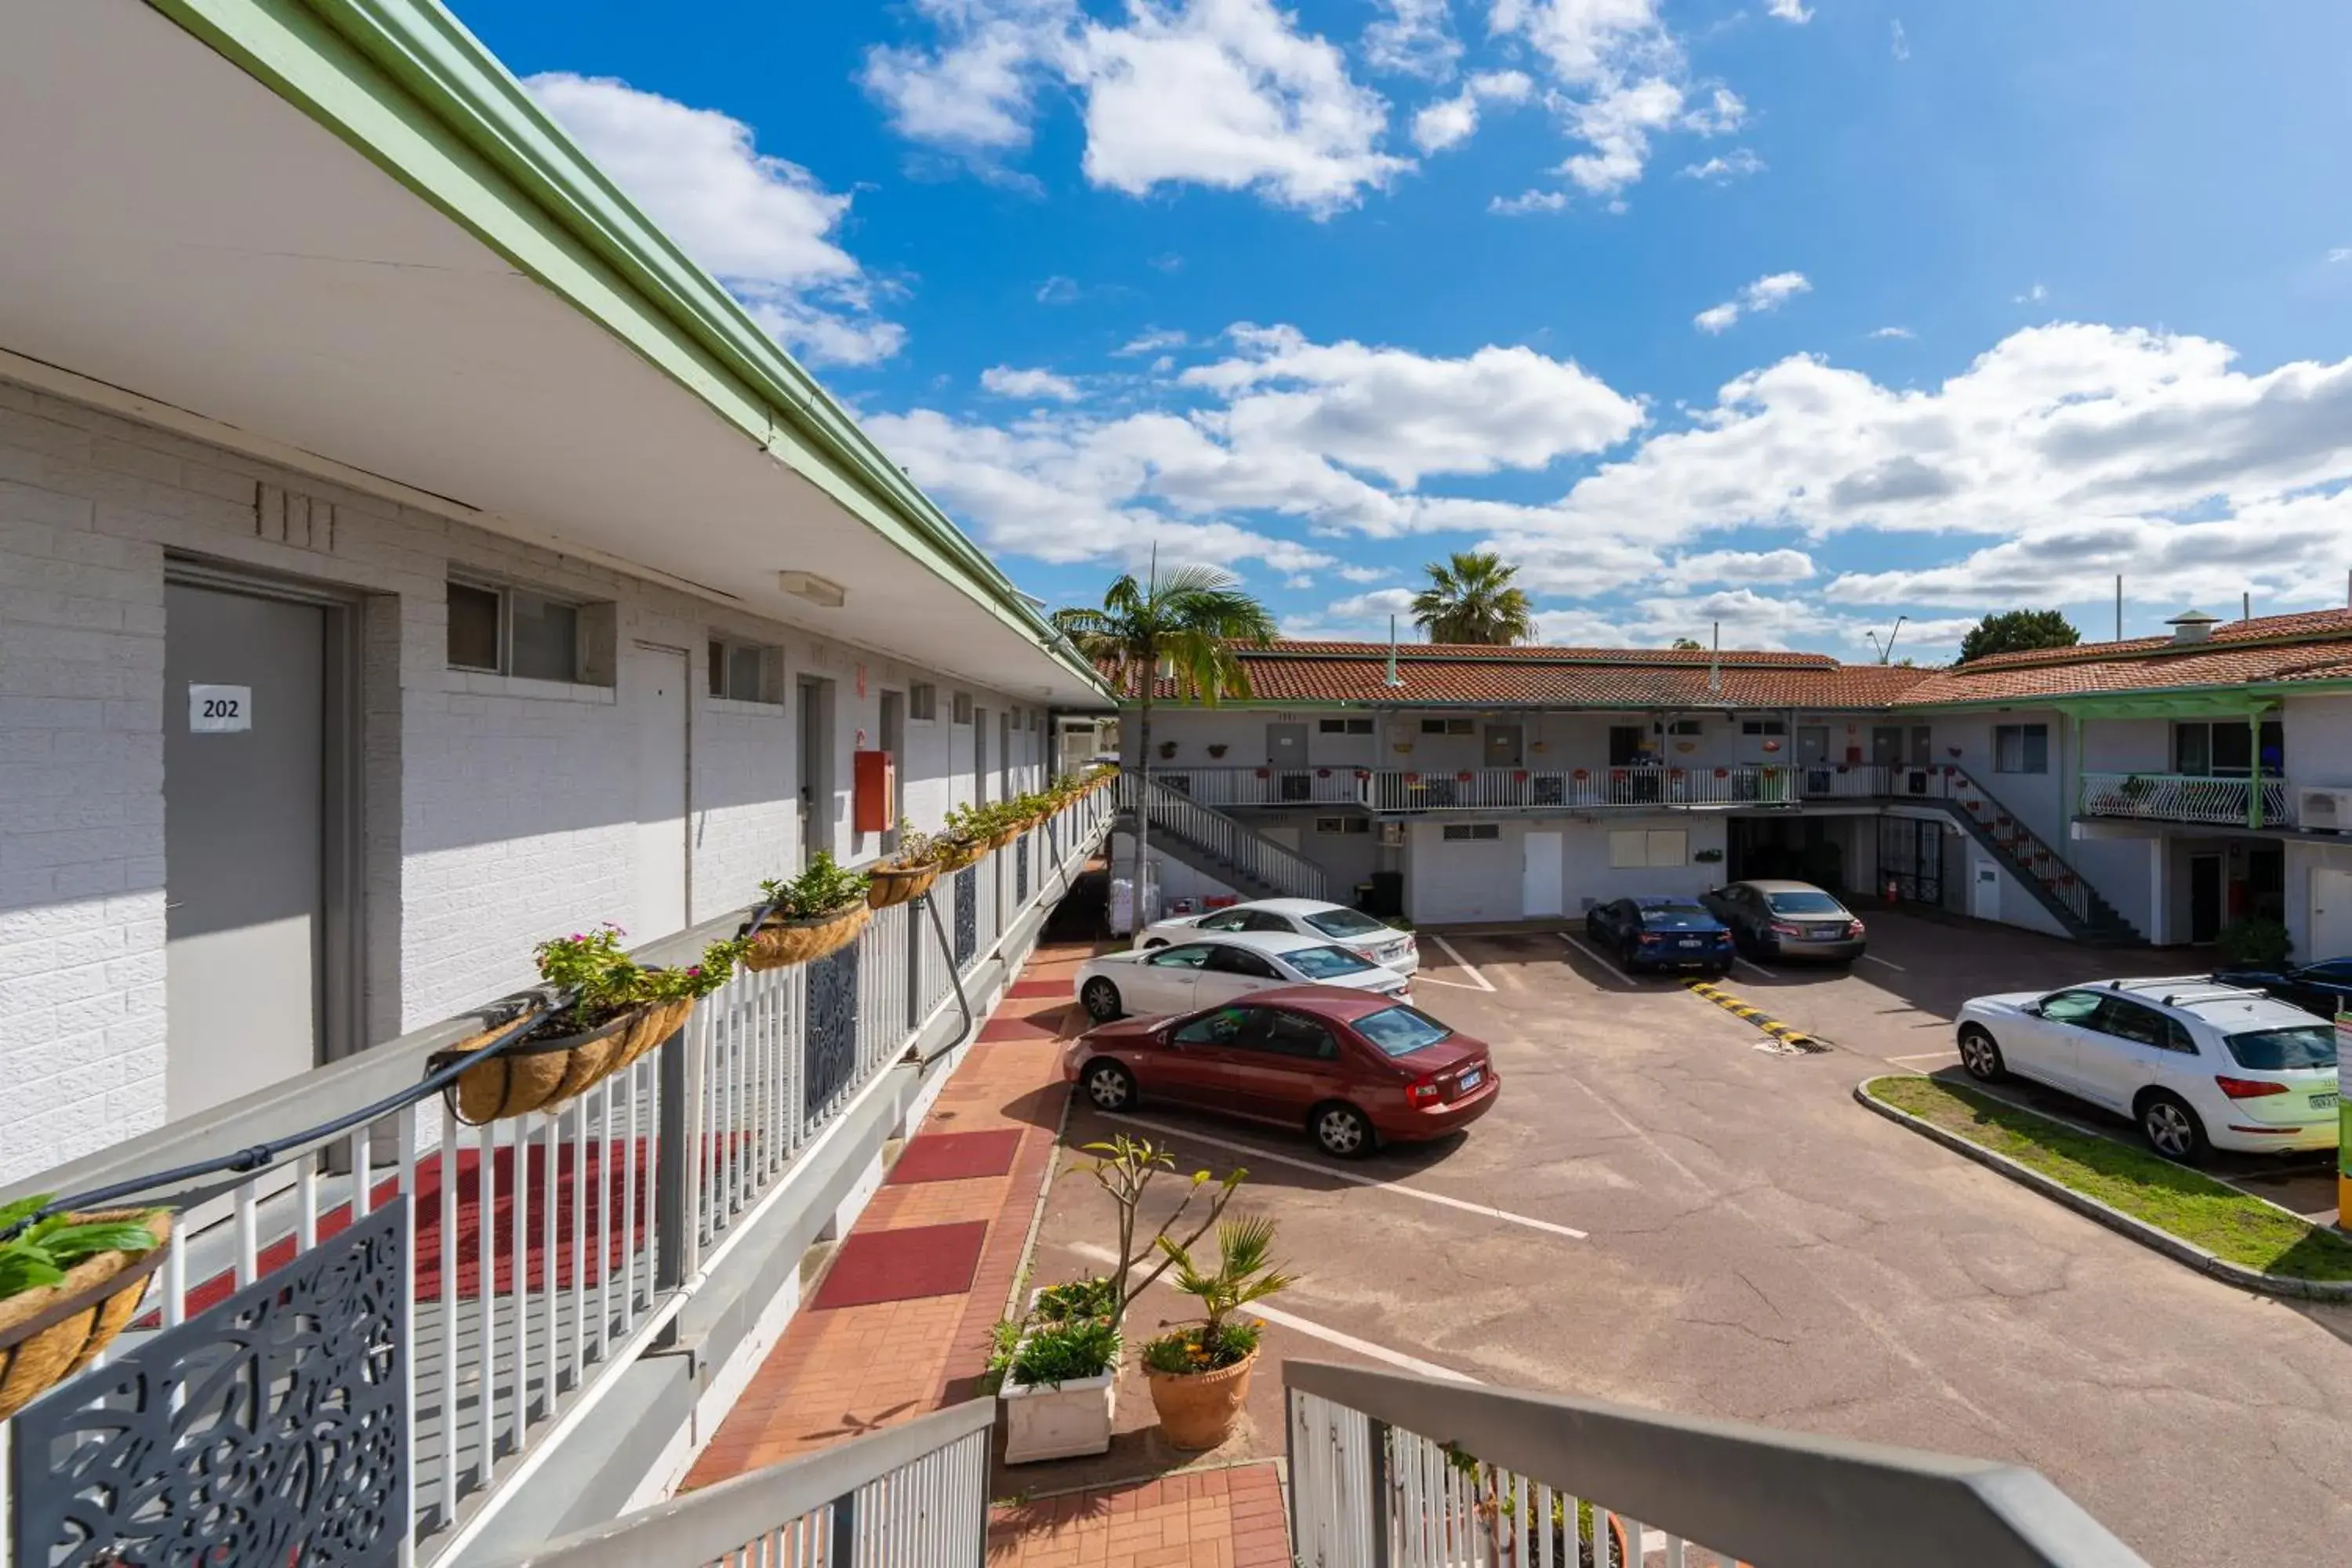 Property building in Econo Lodge Rivervale